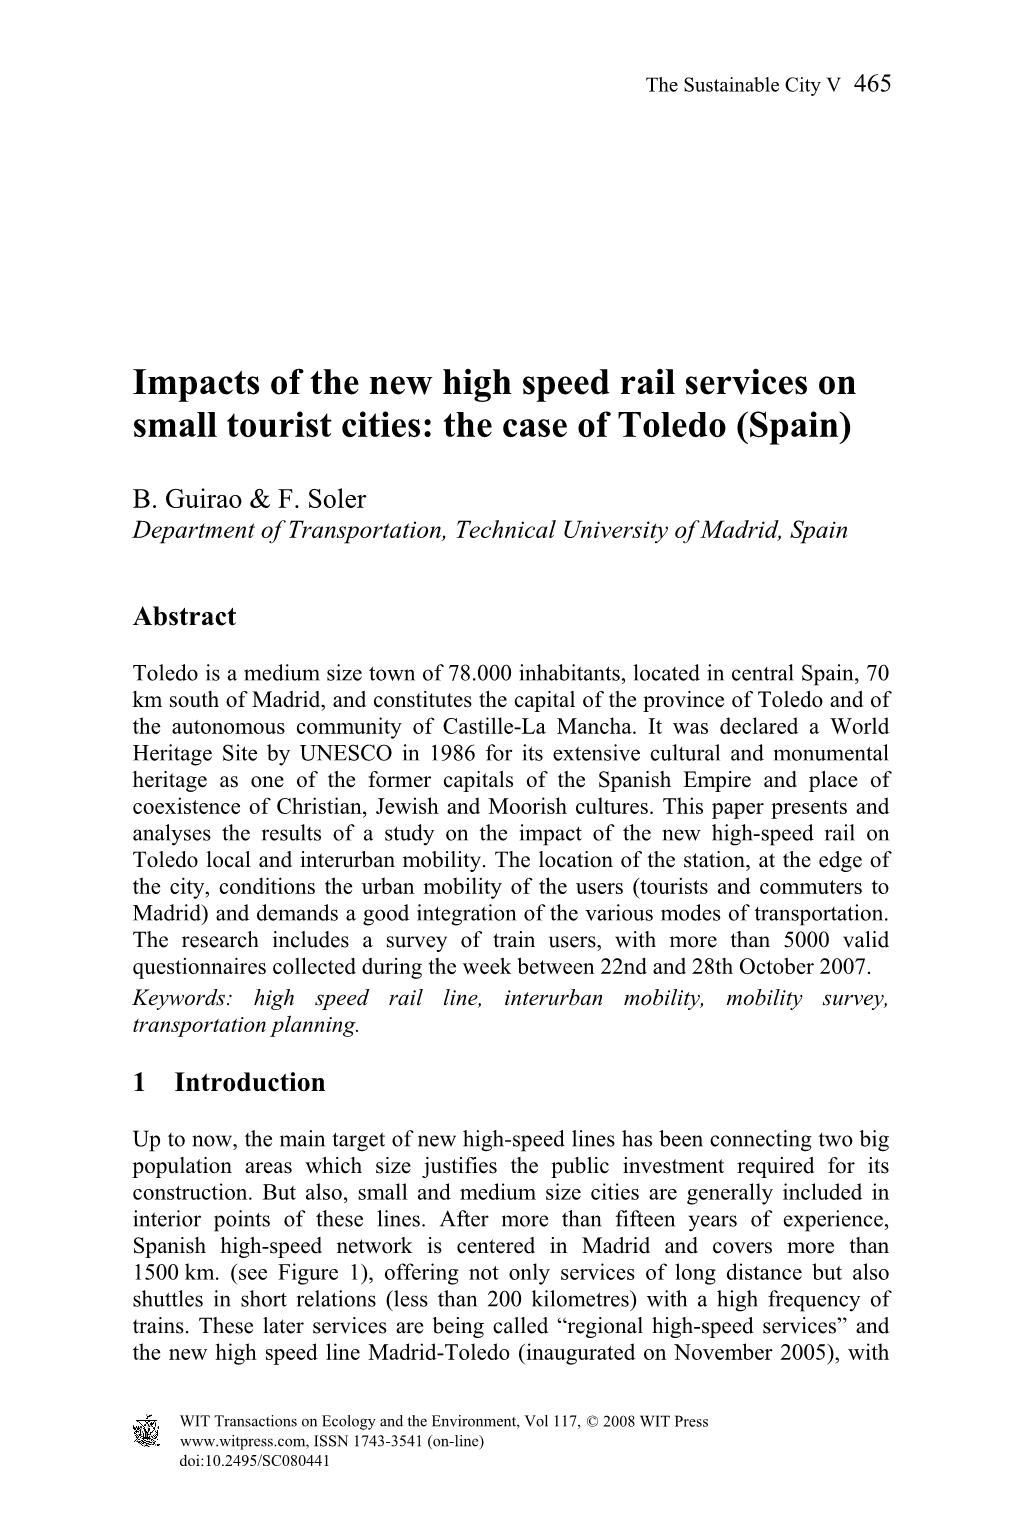 Impacts of the New High Speed Rail Services on Small Tourist Cities: the Case of Toledo (Spain)